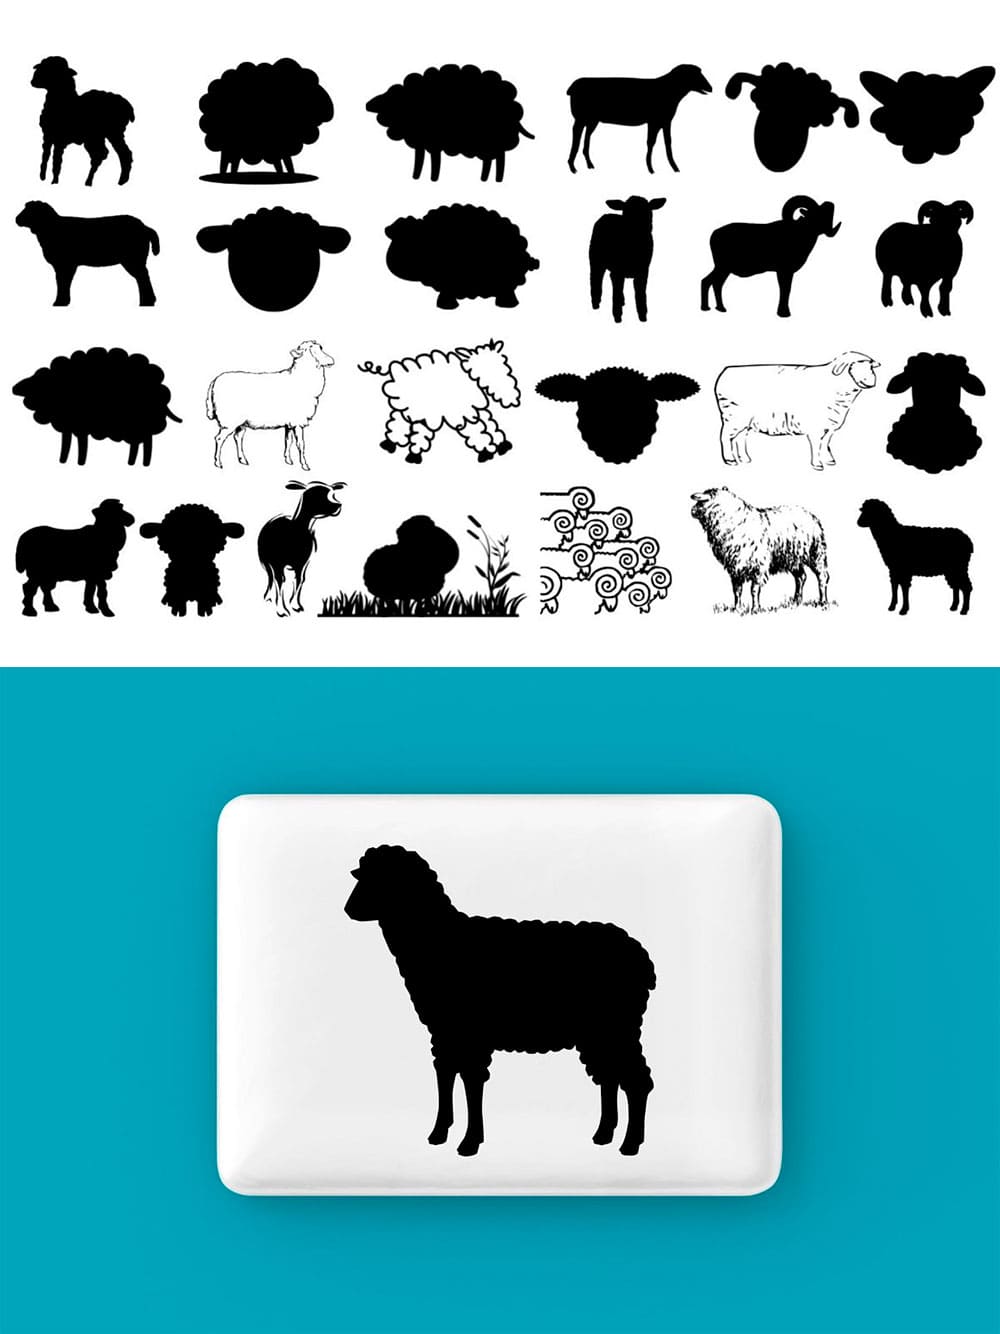 Sheep silhouette bundle, picture for pinterest.